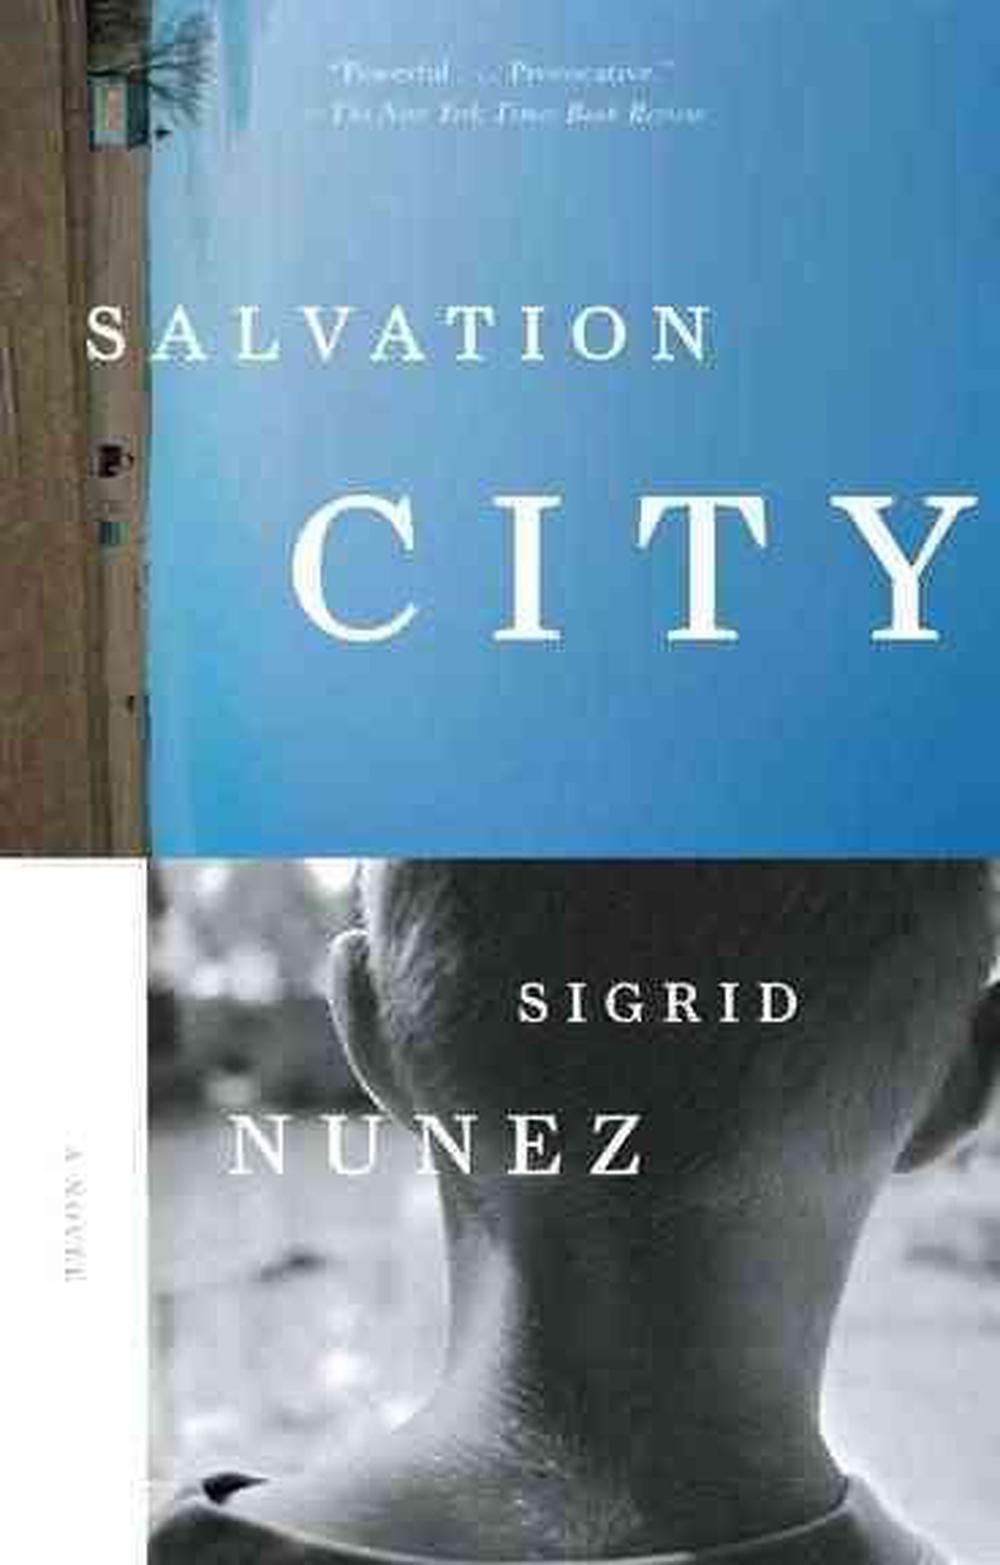 Salvation　online　Paperback,　Nunez,　City　Buy　by　Nile　Sigrid　9781594485374　at　The